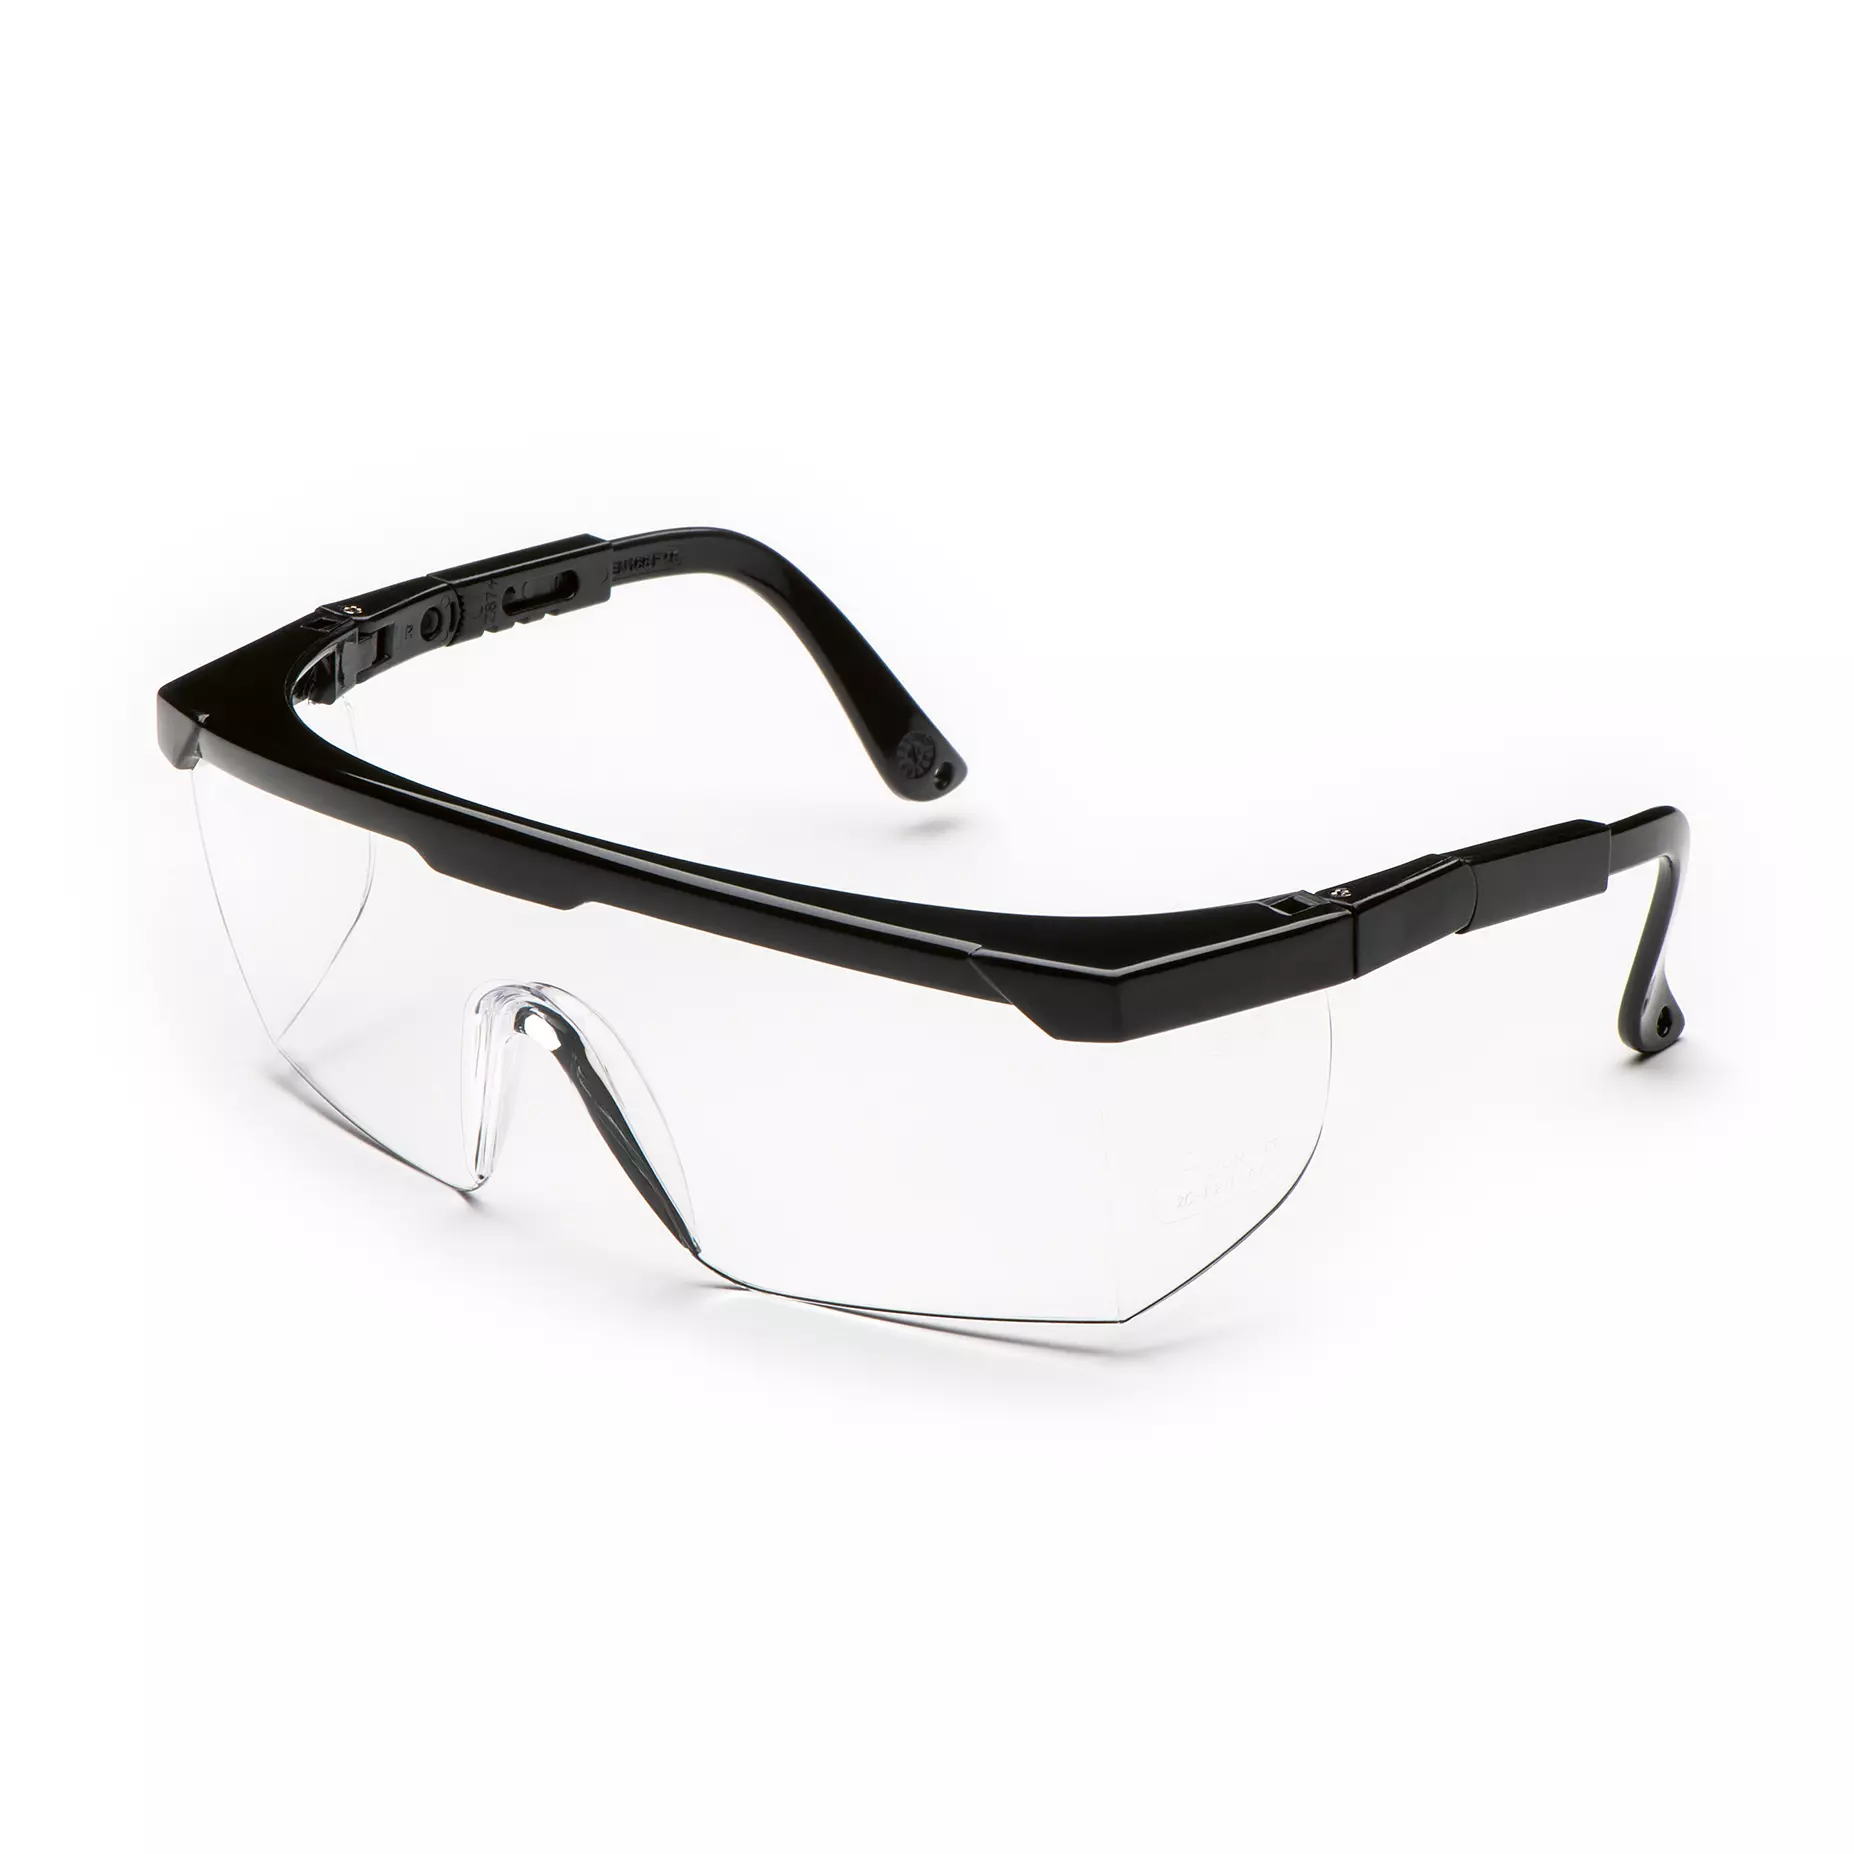 Speed Top safety goggles